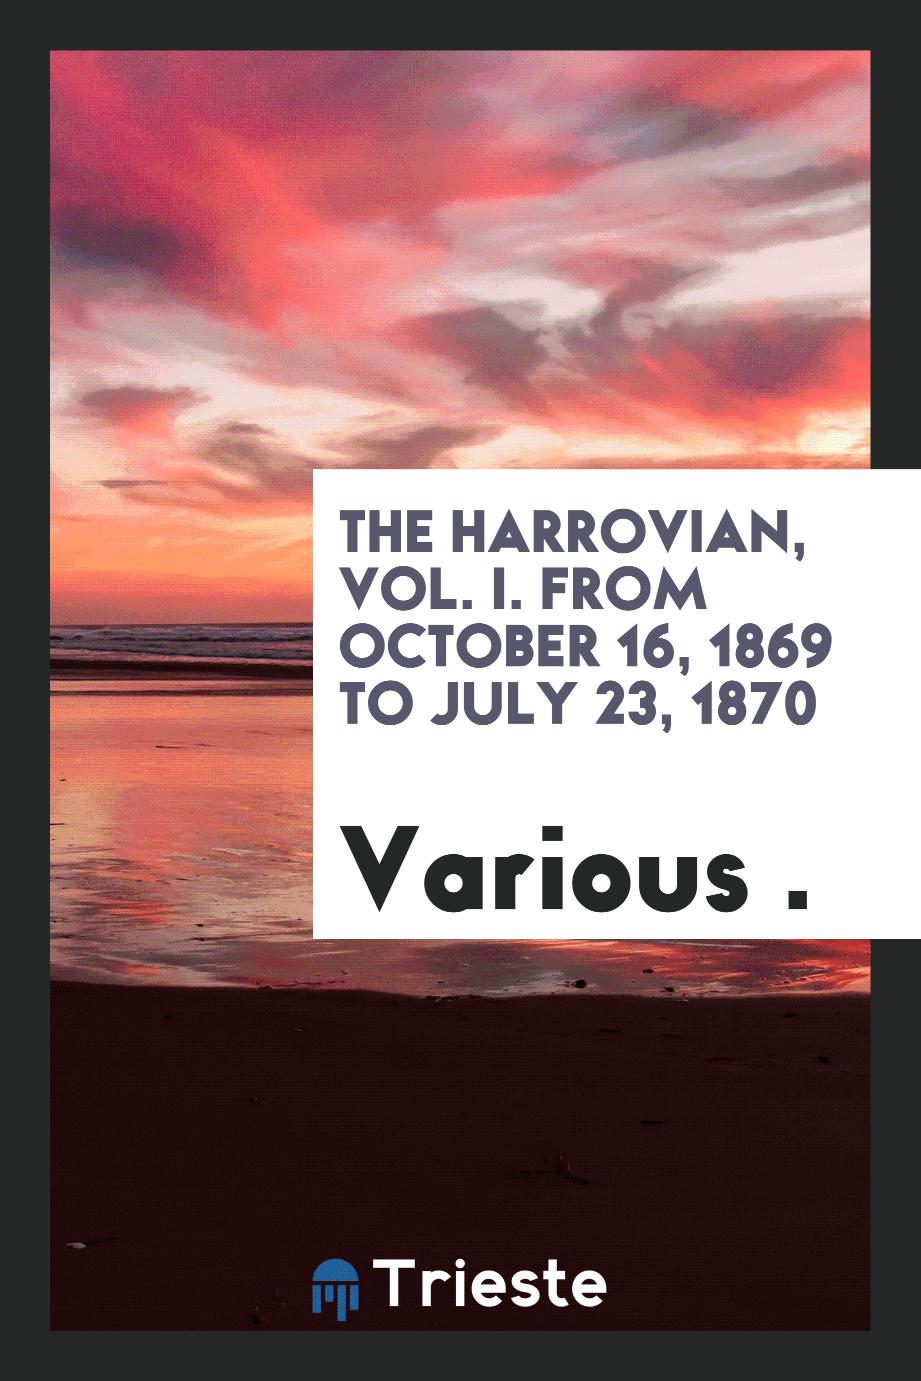 The Harrovian, Vol. I. From October 16, 1869 to July 23, 1870